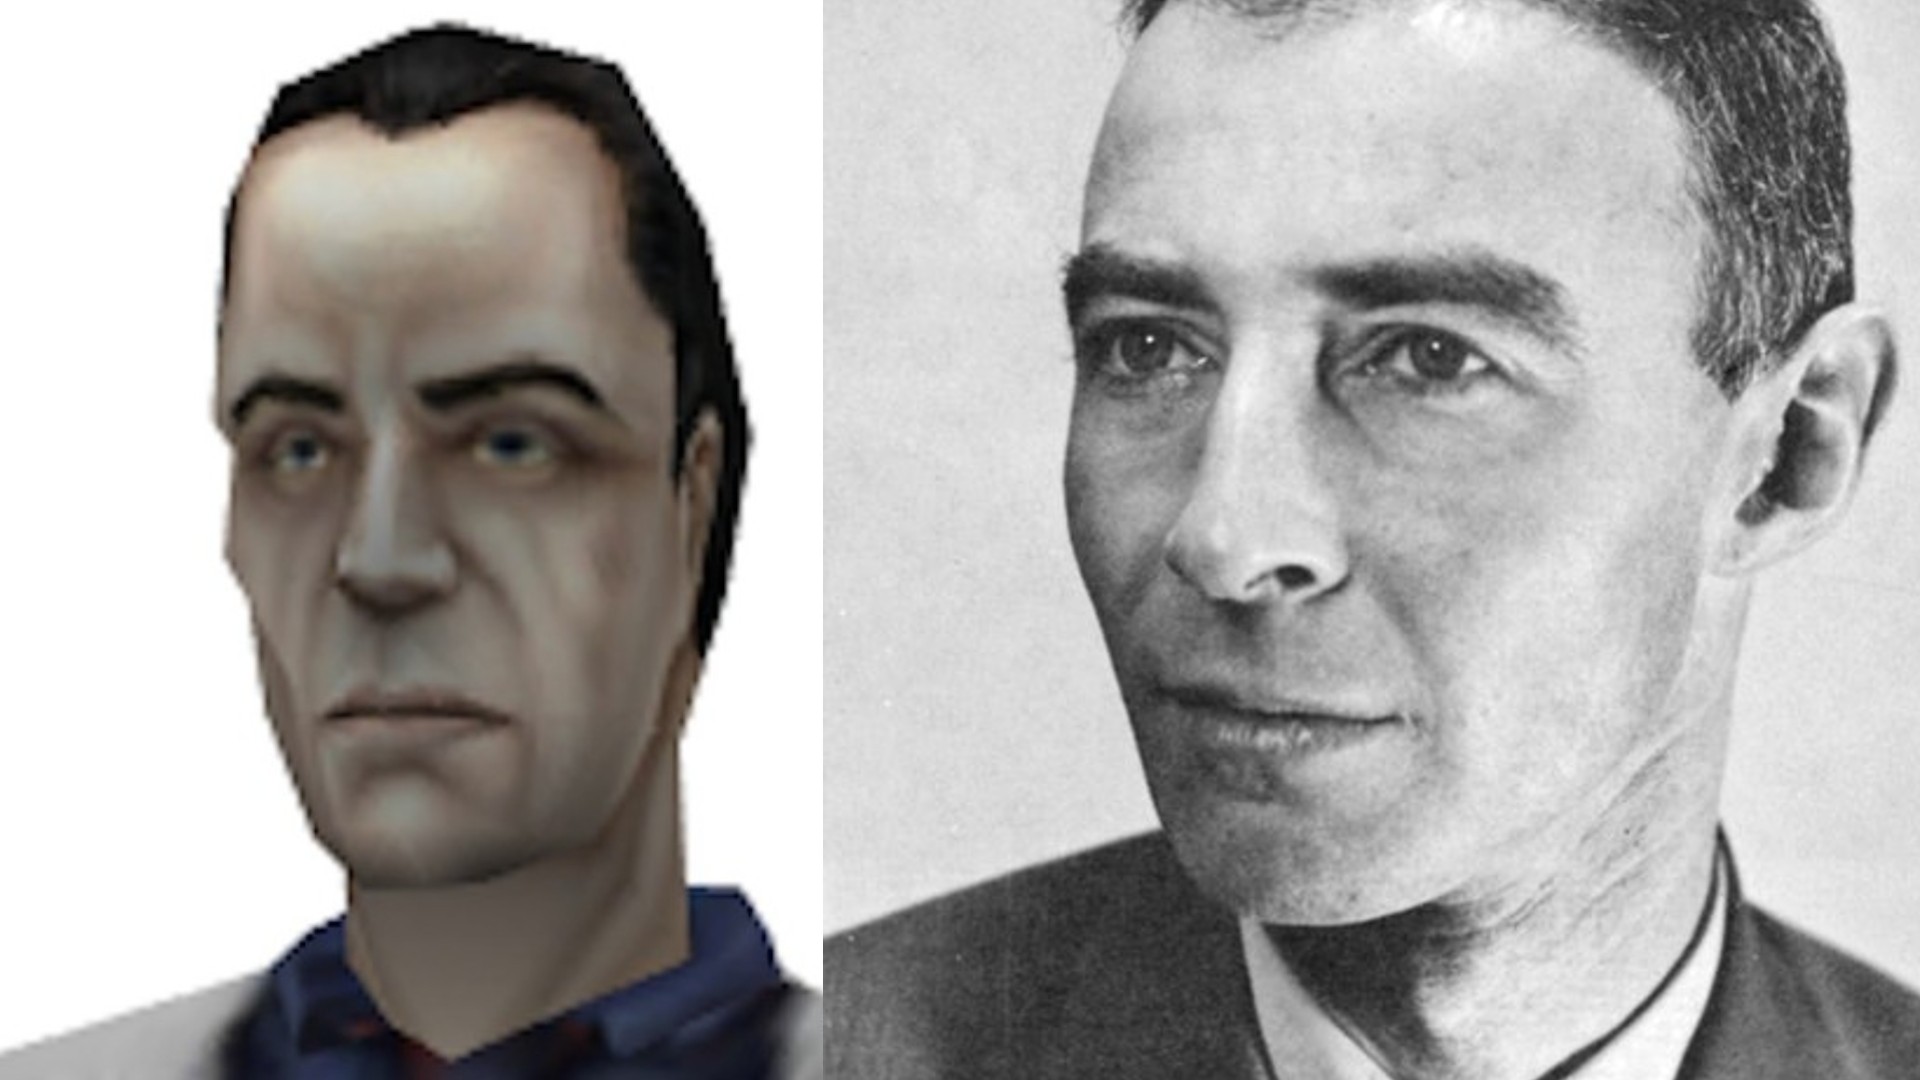 a photo of gman from half life 2 in the style of